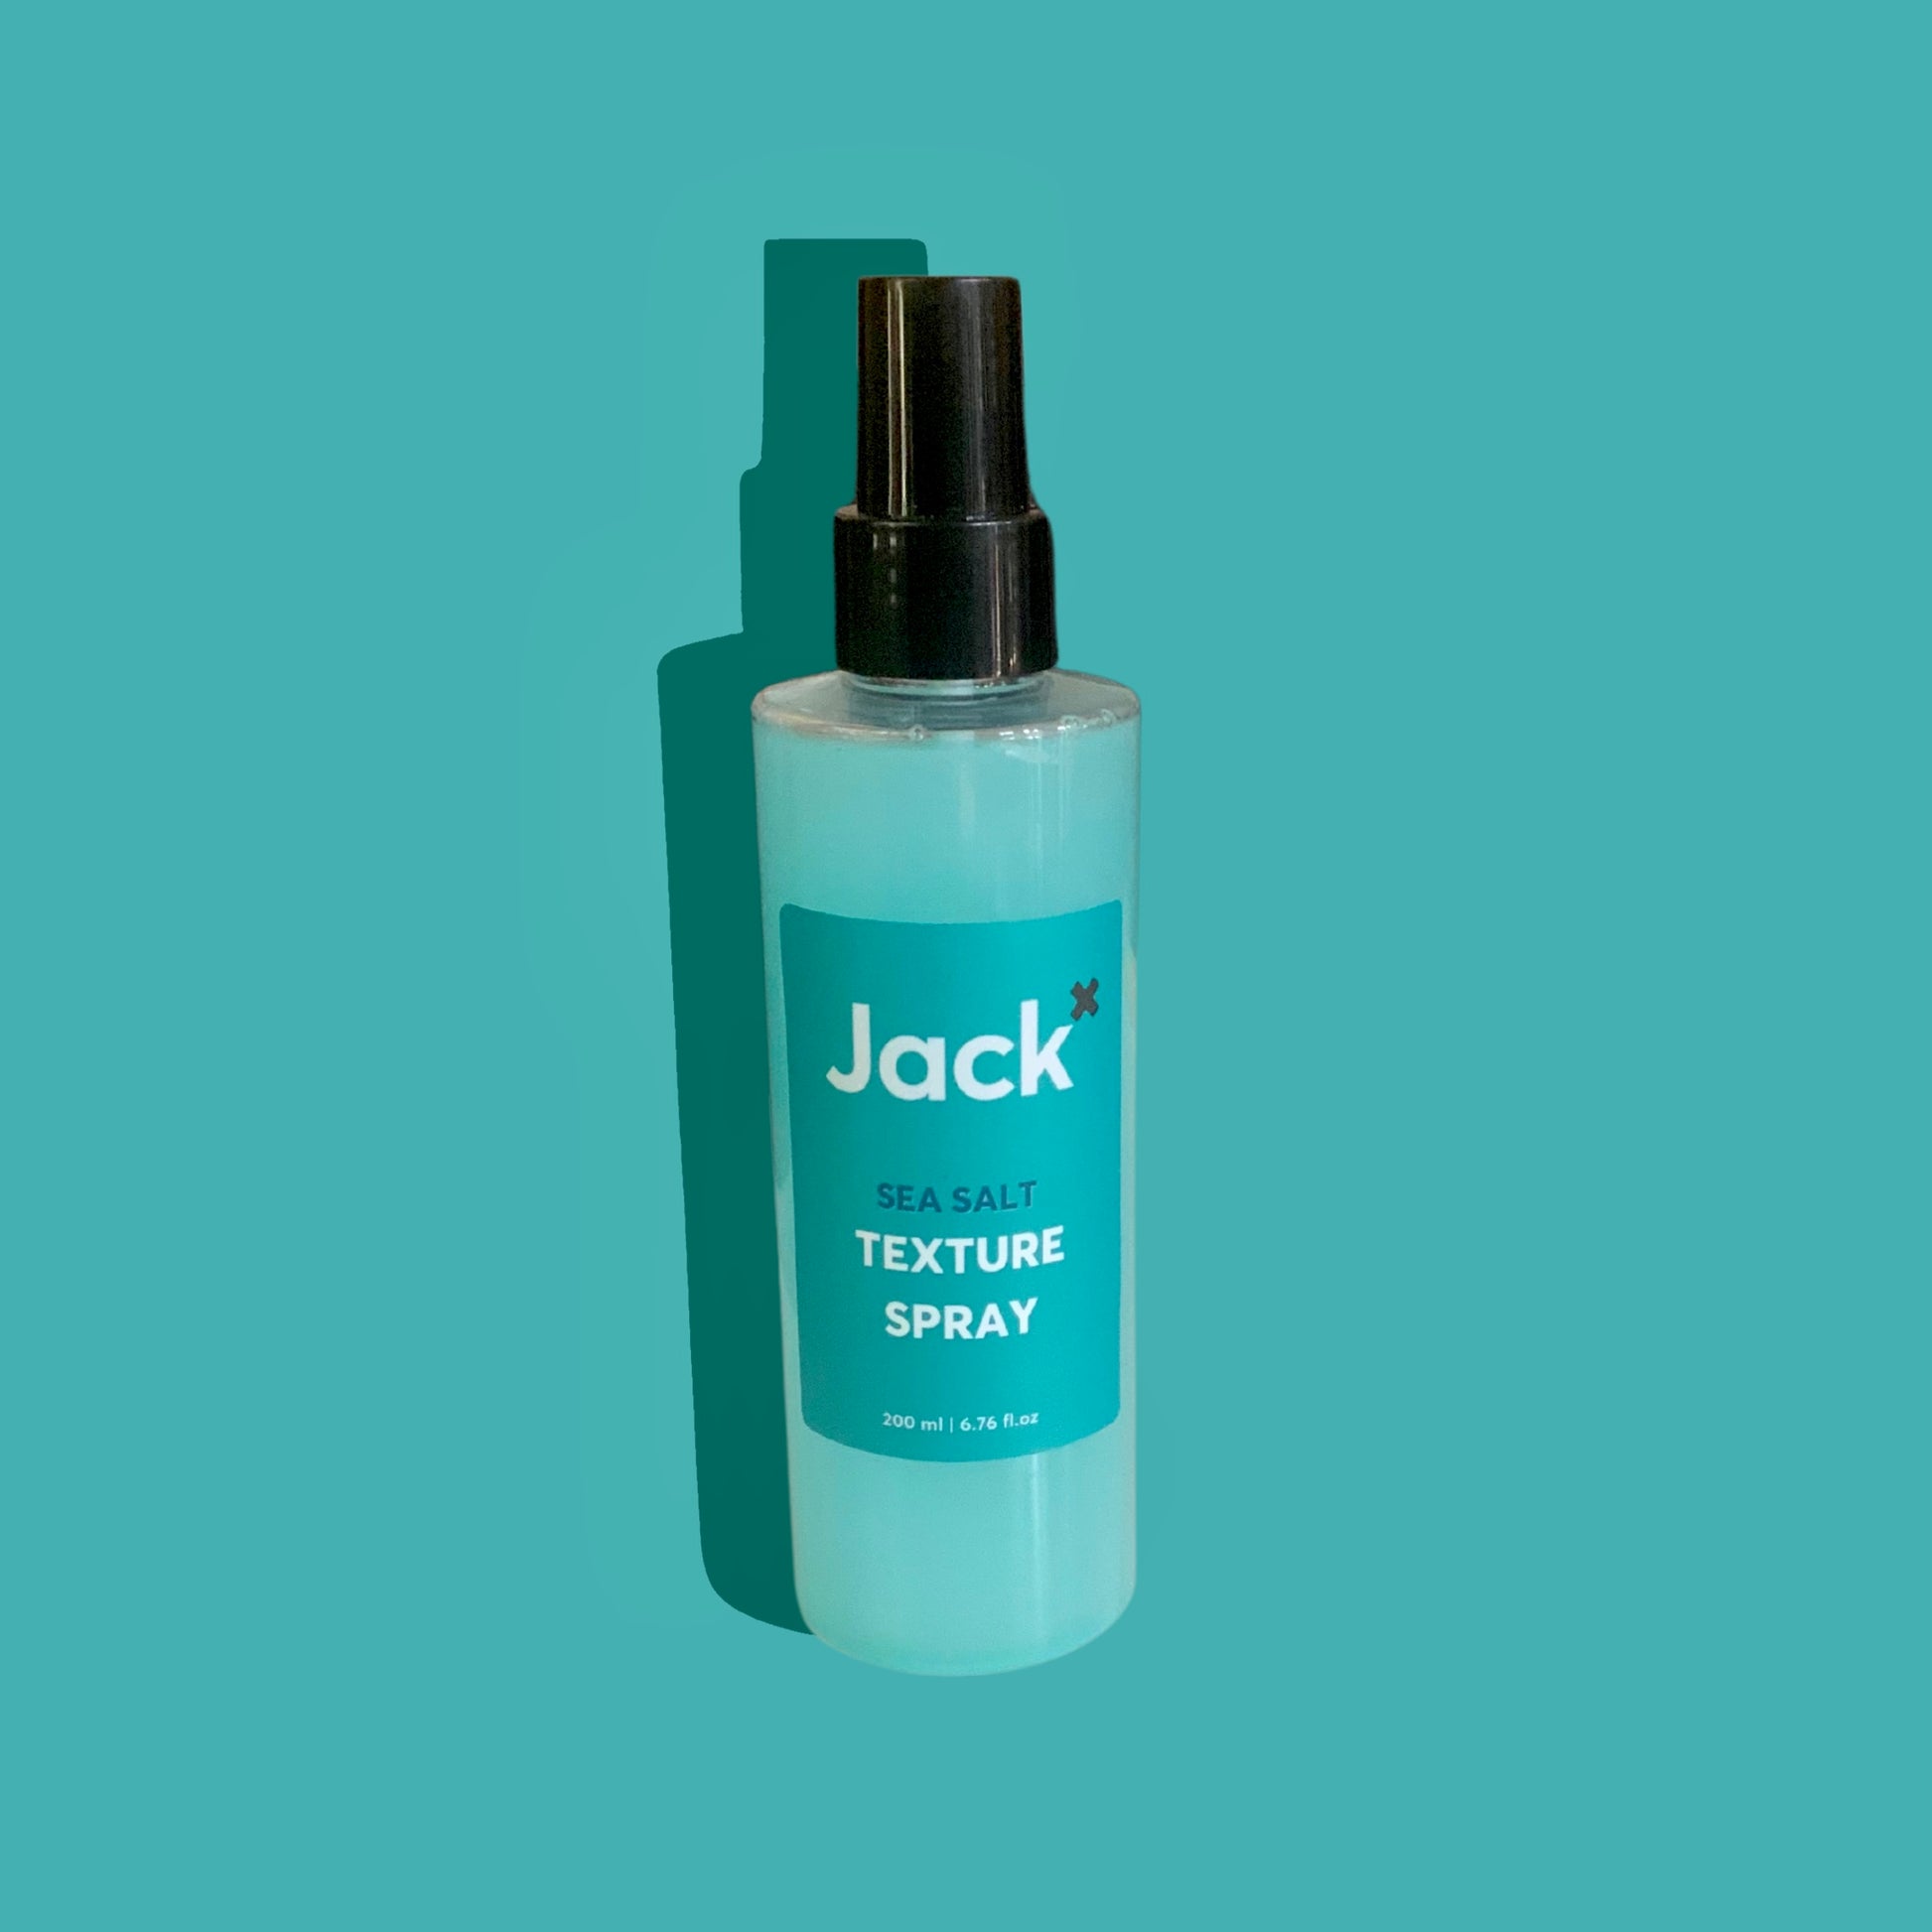 Sea salt texture spray for men and women, one hair made in Australia by jack the snipper